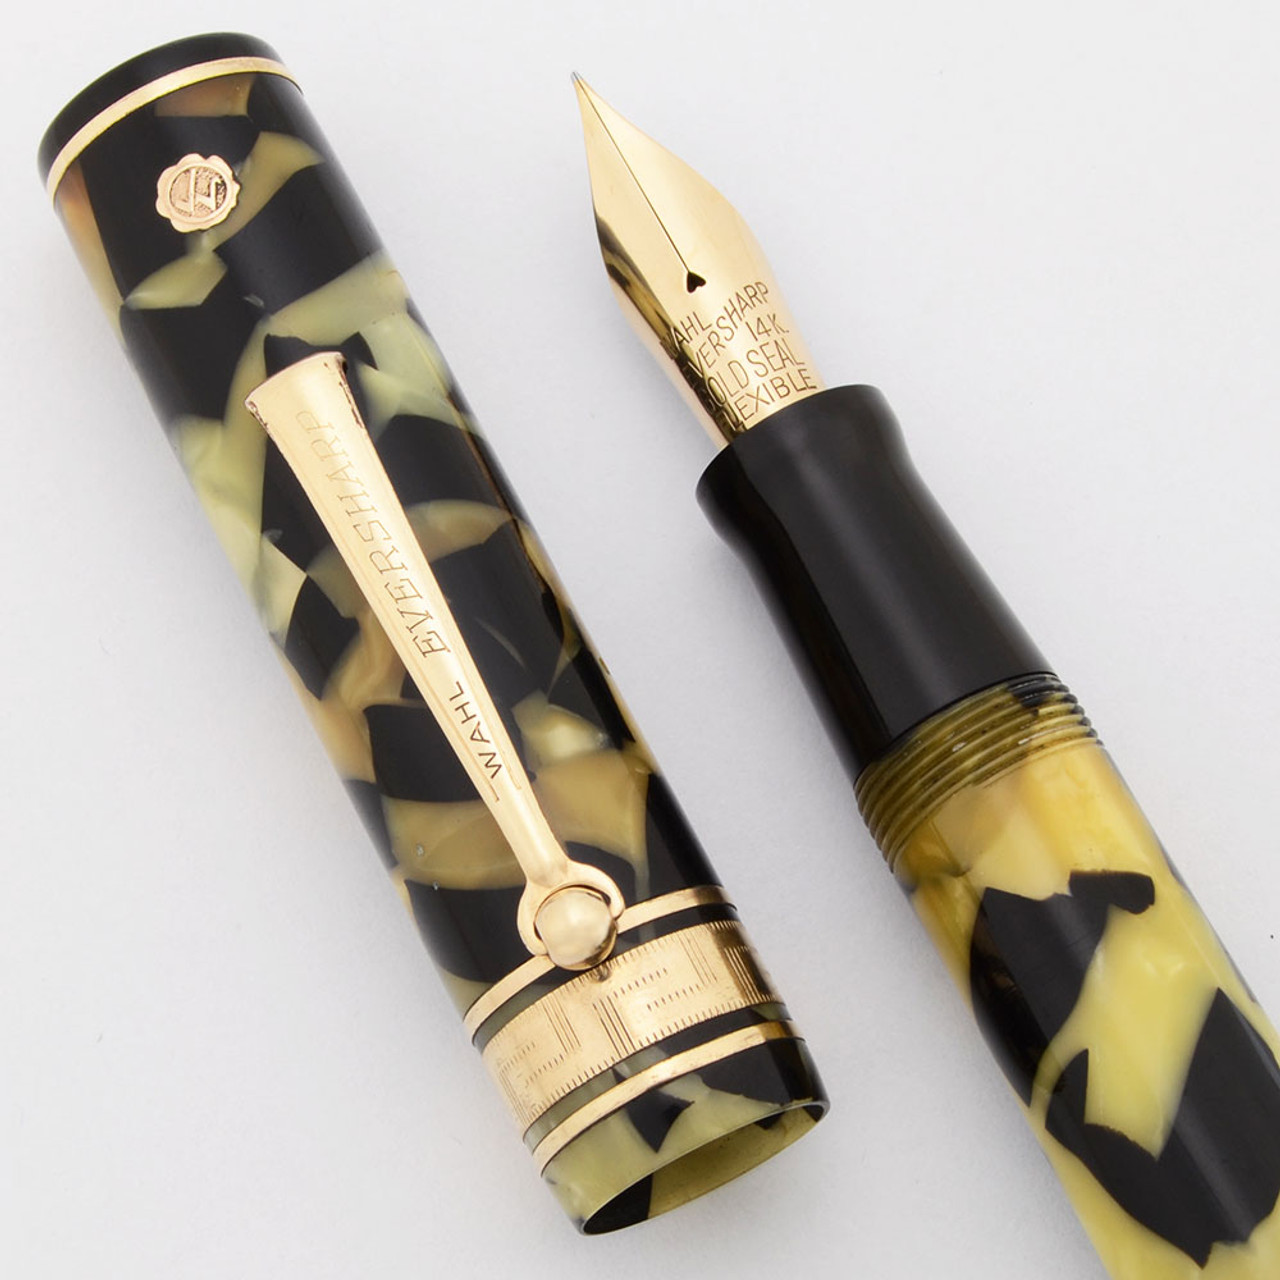 Eversharp Decoband Gold Seal Fountain Pen (1930s) - Black and Pearl, Oversize,  Lever Filler, 14k Gold Seal Full Flex Nib (Very Nice, Restored)